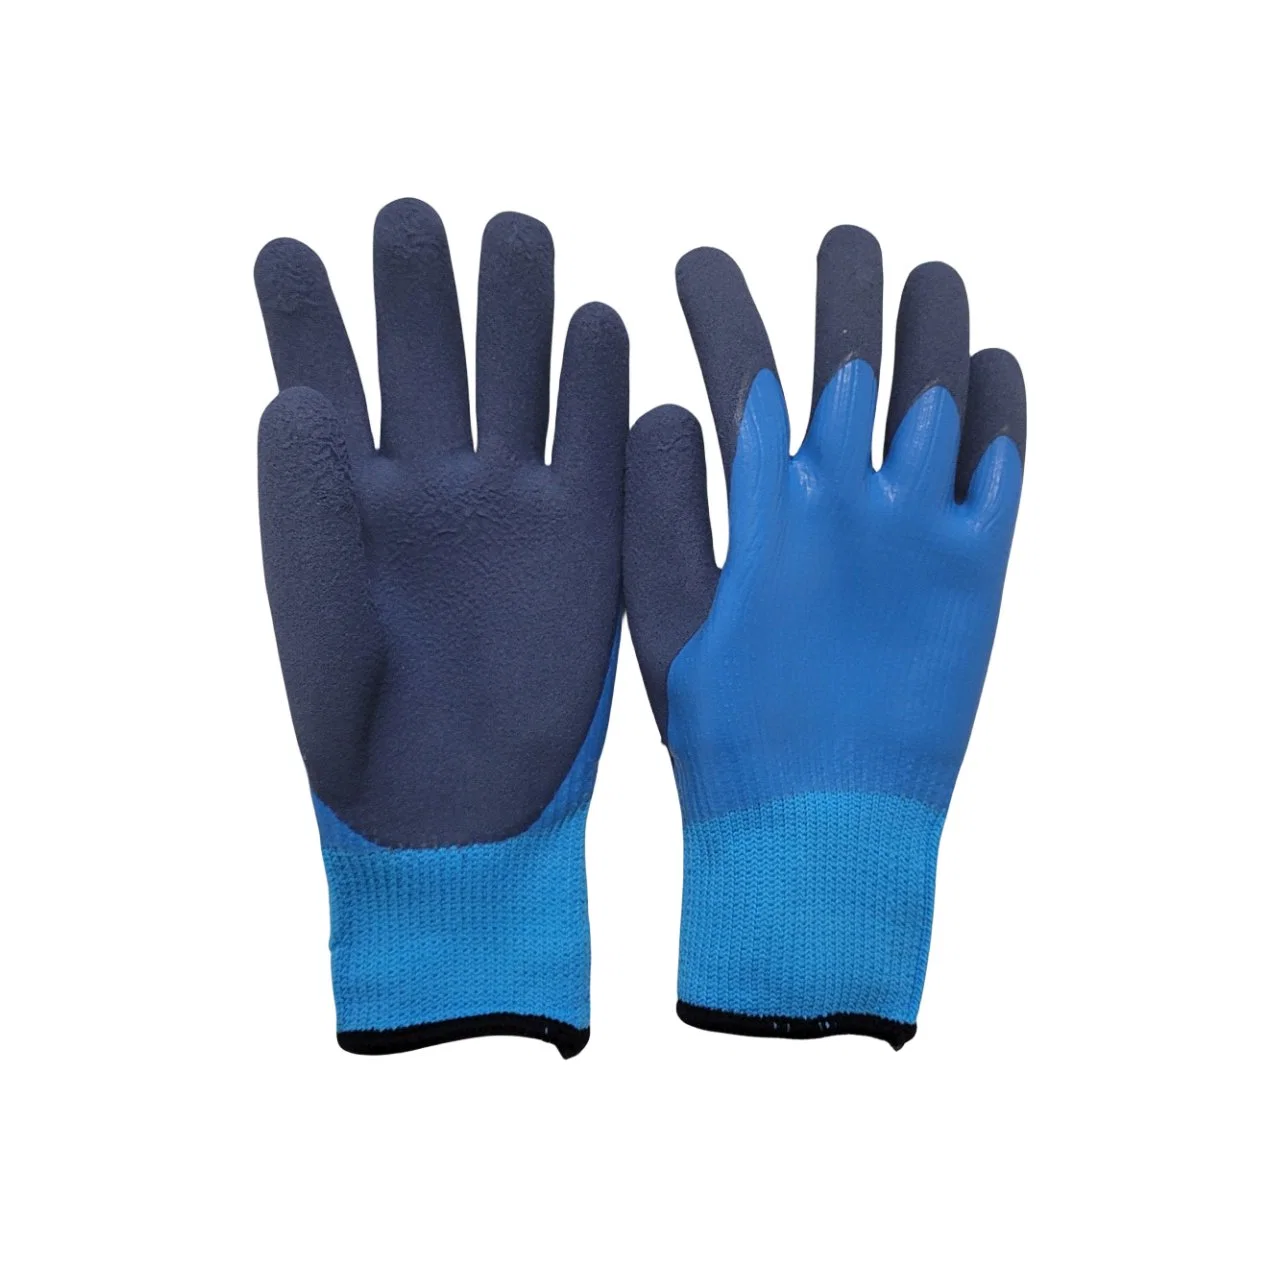 Wholesale/Suppliers Price Winter Fully Coated Waterproof Latex Foam Rubber Industrial Protective Safety Work Lobor Cotton Cut Resistant Glove